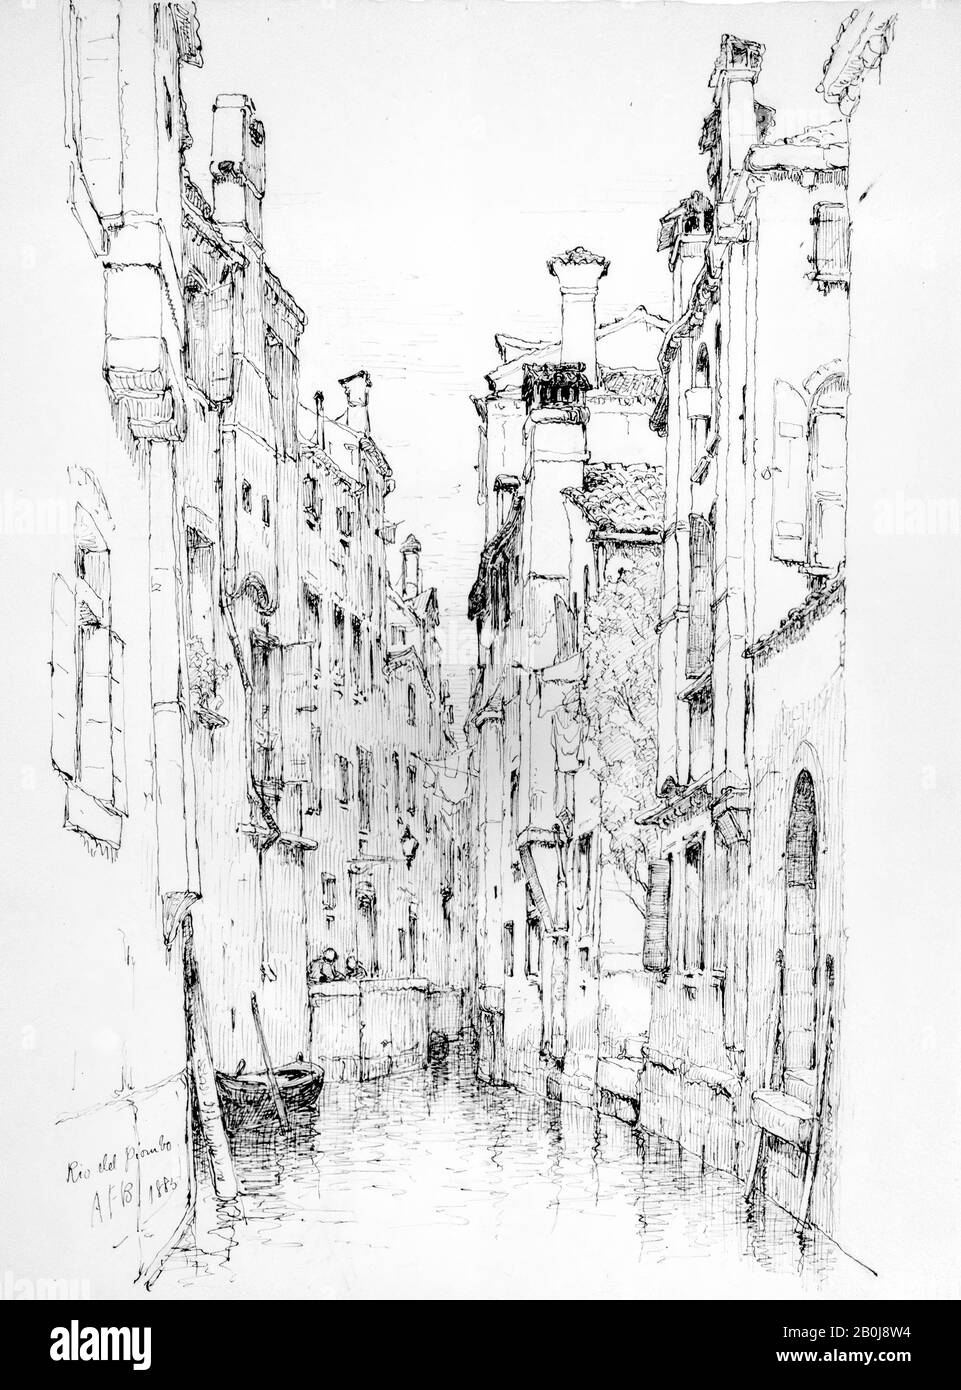 Andrew Fisher Bunner, Rio del Piombo, Venice, American, Andrew Fisher Bunner (1841–1897), 1885, American, Black ink and graphite traces on off-white wove paper, 12 1/4 x 9 1/4 in. (31.1 x 23.5 cm), Drawings Stock Photo